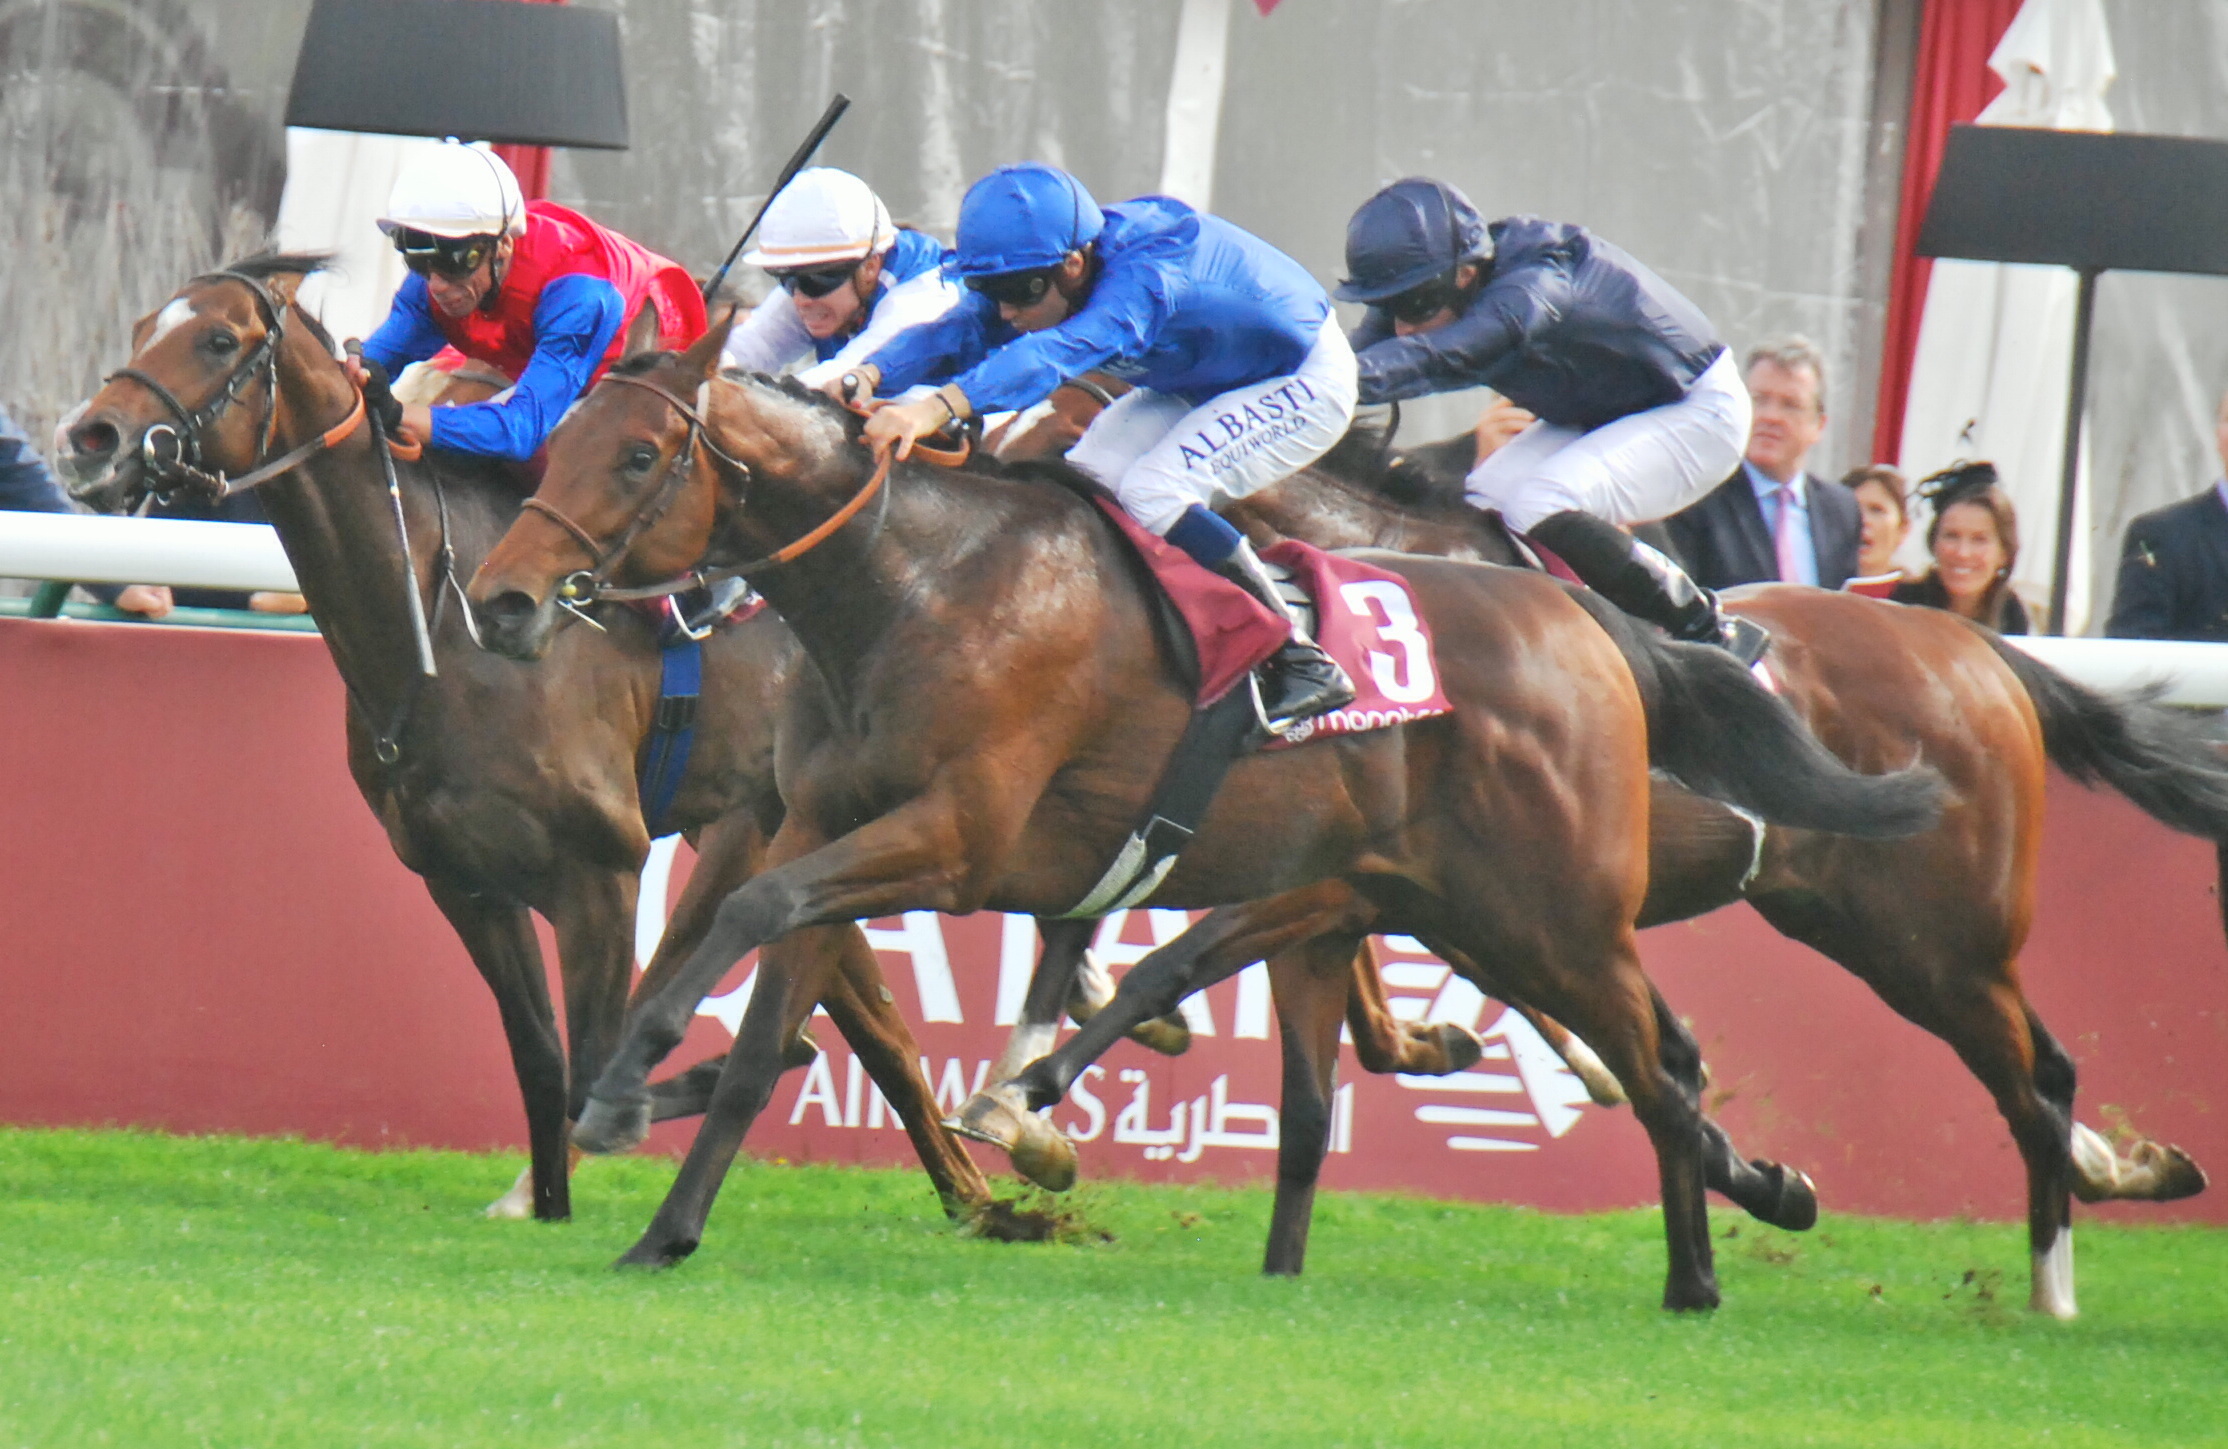 Godolphin’s Victor Ludorum, André Fabre’s main contender for the Poule d’Essai des Poulains on June 1, is pictured winning the Prix Jean-Luc Lagadere on Arc Day at ParisLongchamp last October. Photo: John Gilmore